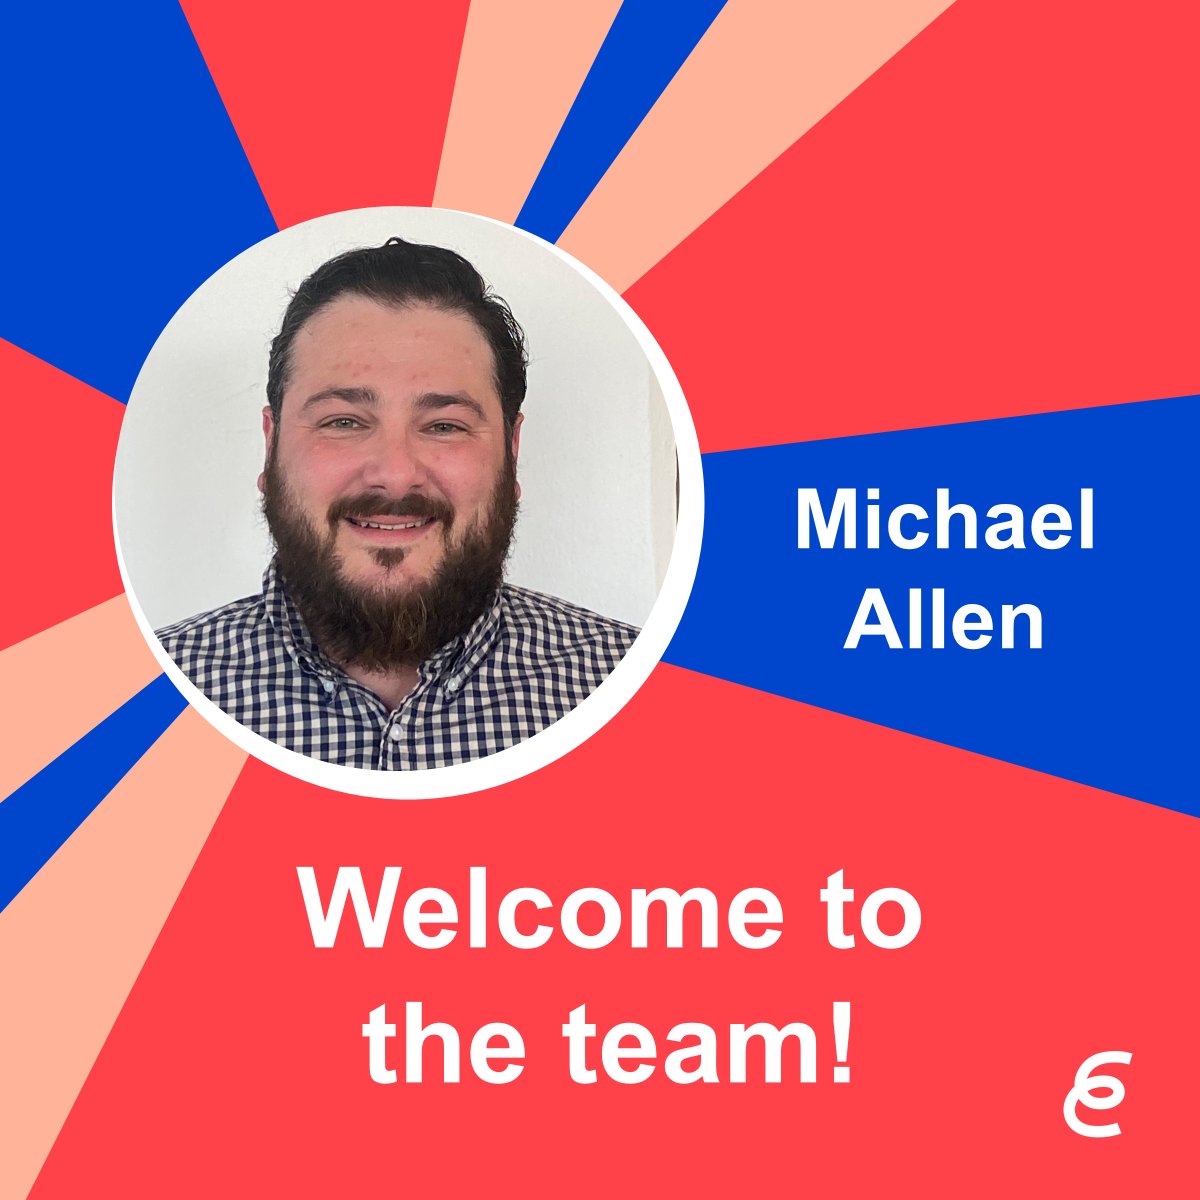 Welcome to the Evergreen Trading team, Michael Allen! We're glad to have you!

#hiring #mediacareers #openroles #employeeowned #careersinmedia #hybridwork #ESOP